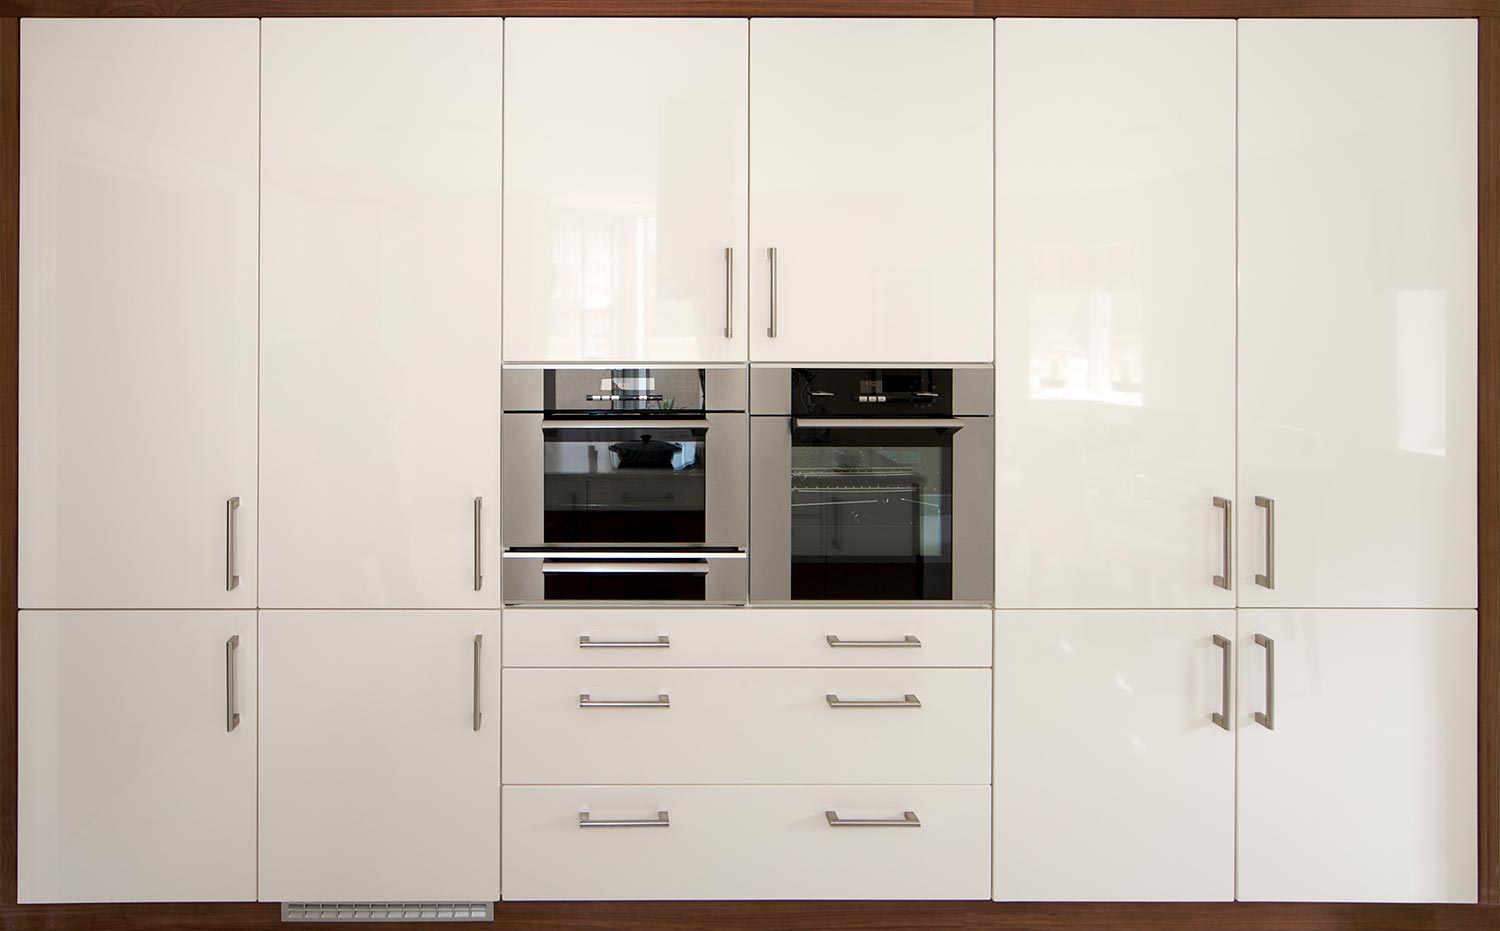 Domestic ovens and cupboards